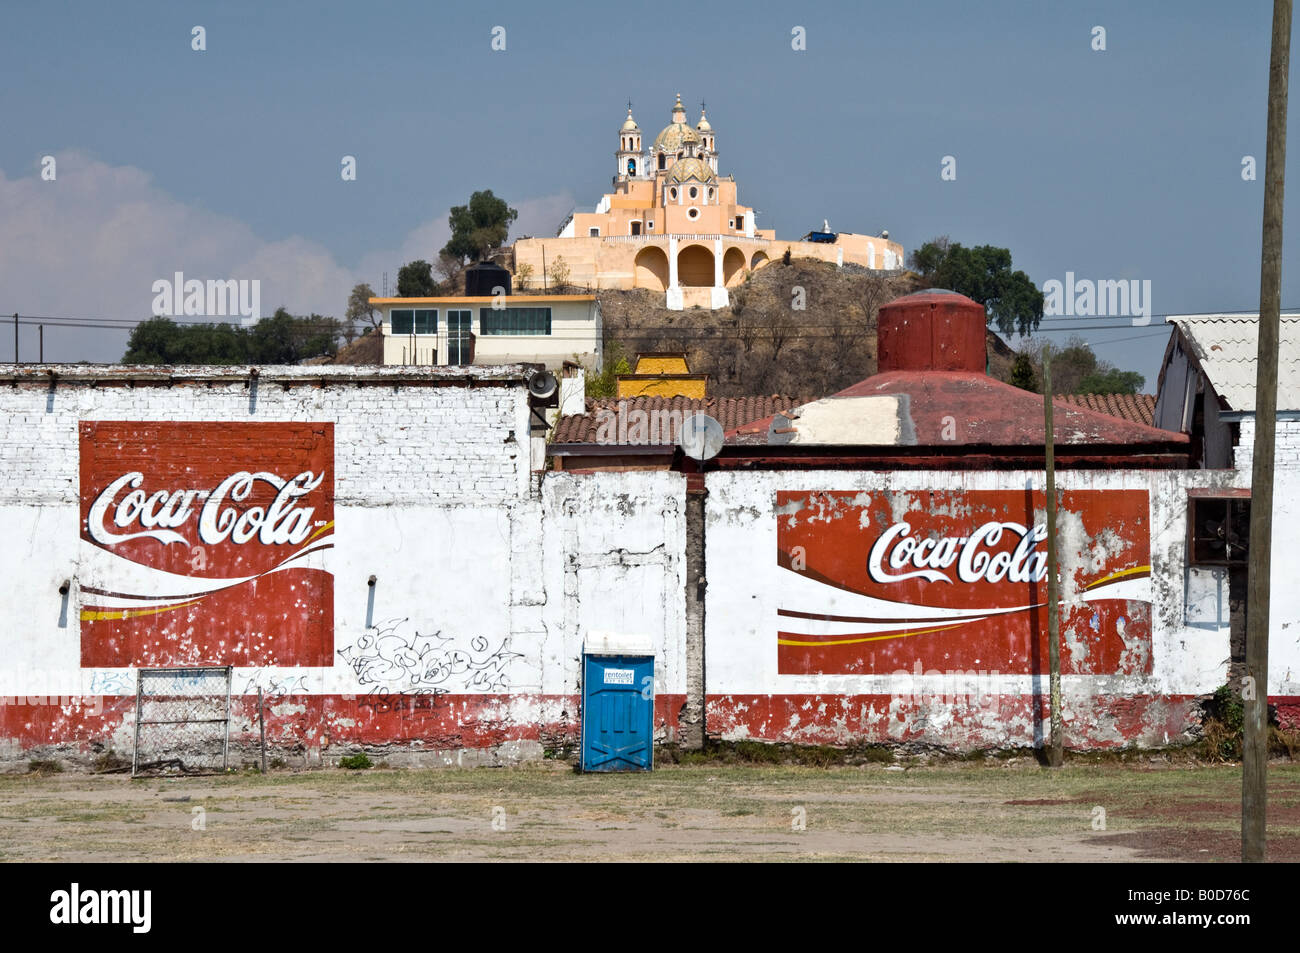 The church of Nuestra Señora de los Remedios, sitting on top of the hidden pyramid in Cholula, Mexico. Signs for Coca Cola too! Stock Photo